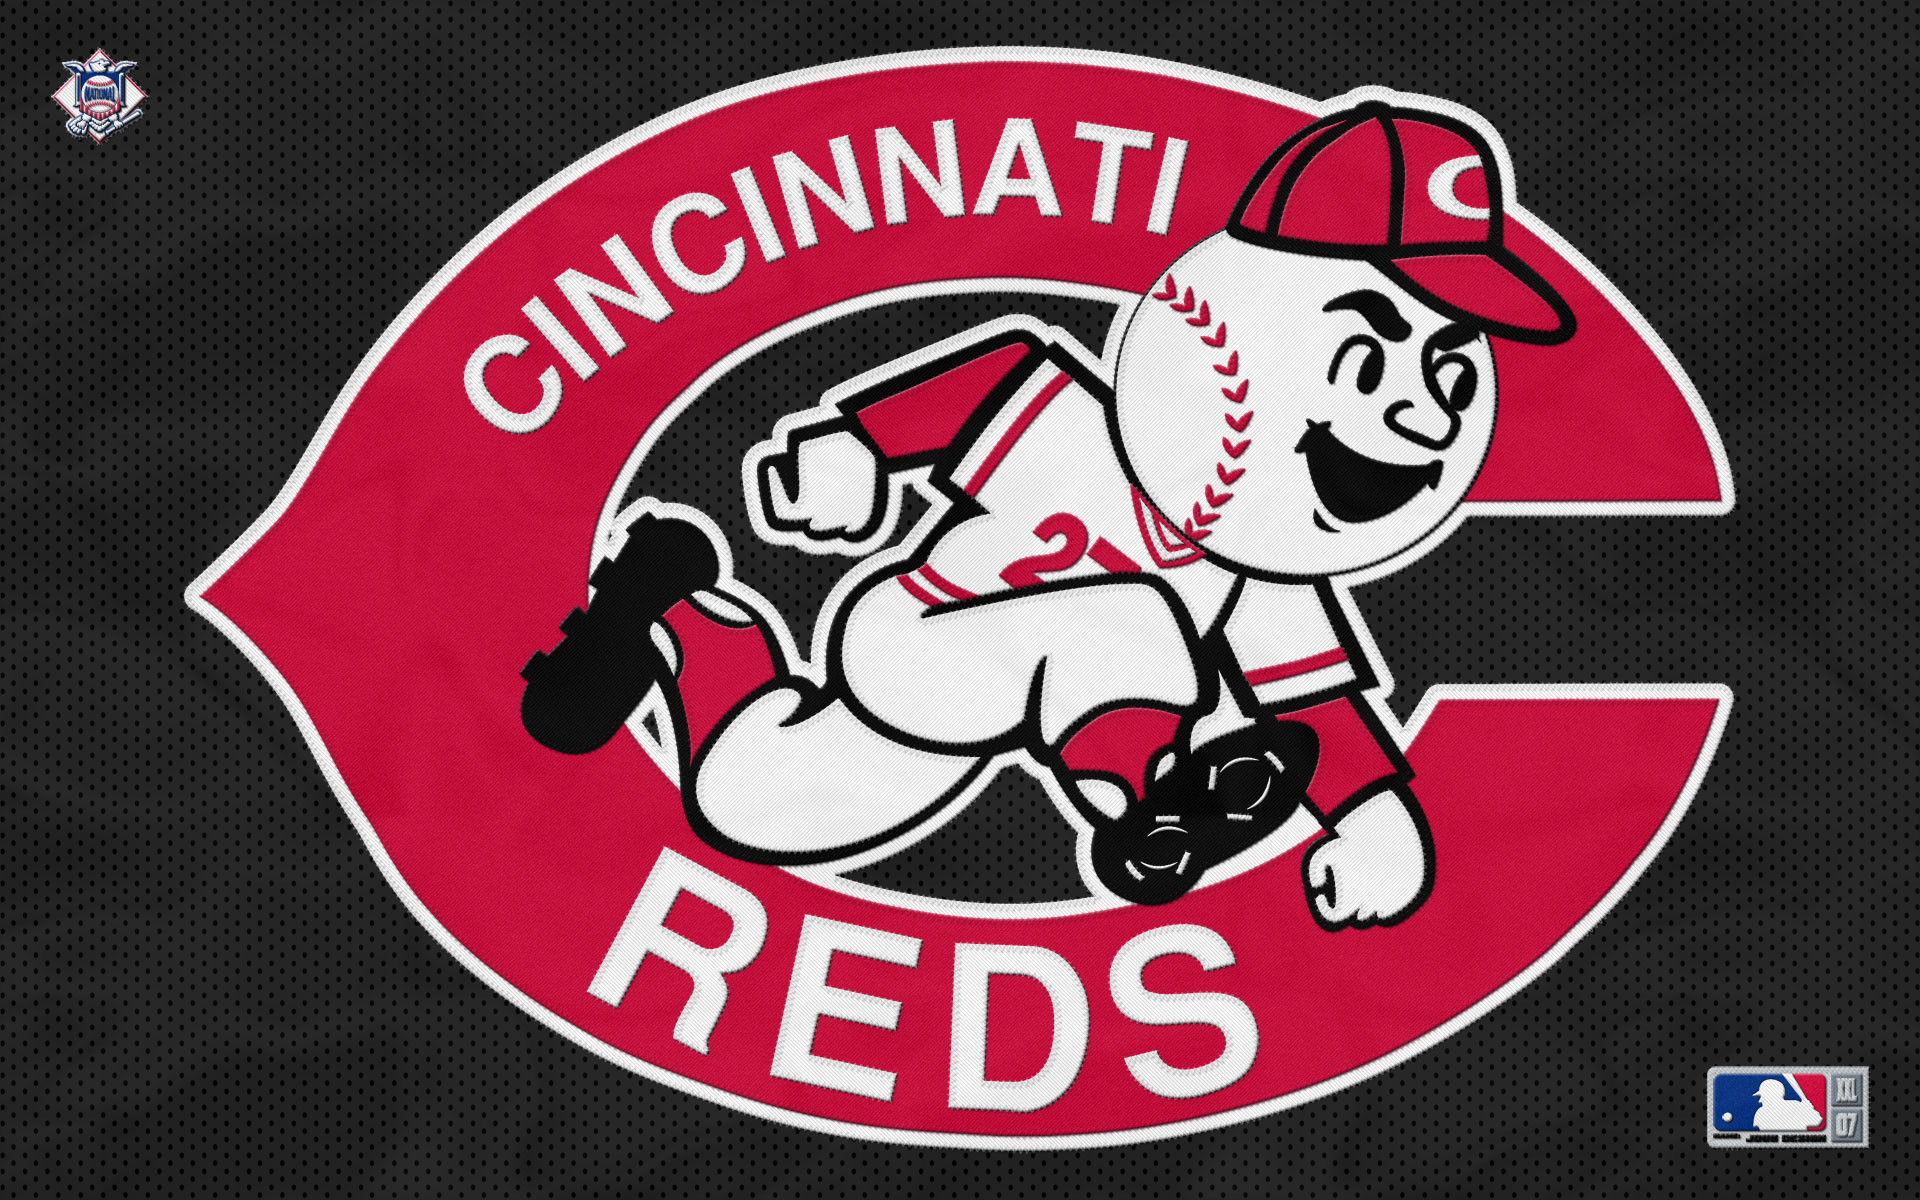 1920x1200 Related Wallpapers from NY Giants Wallpaper. Cincinnati Reds Wallpaper